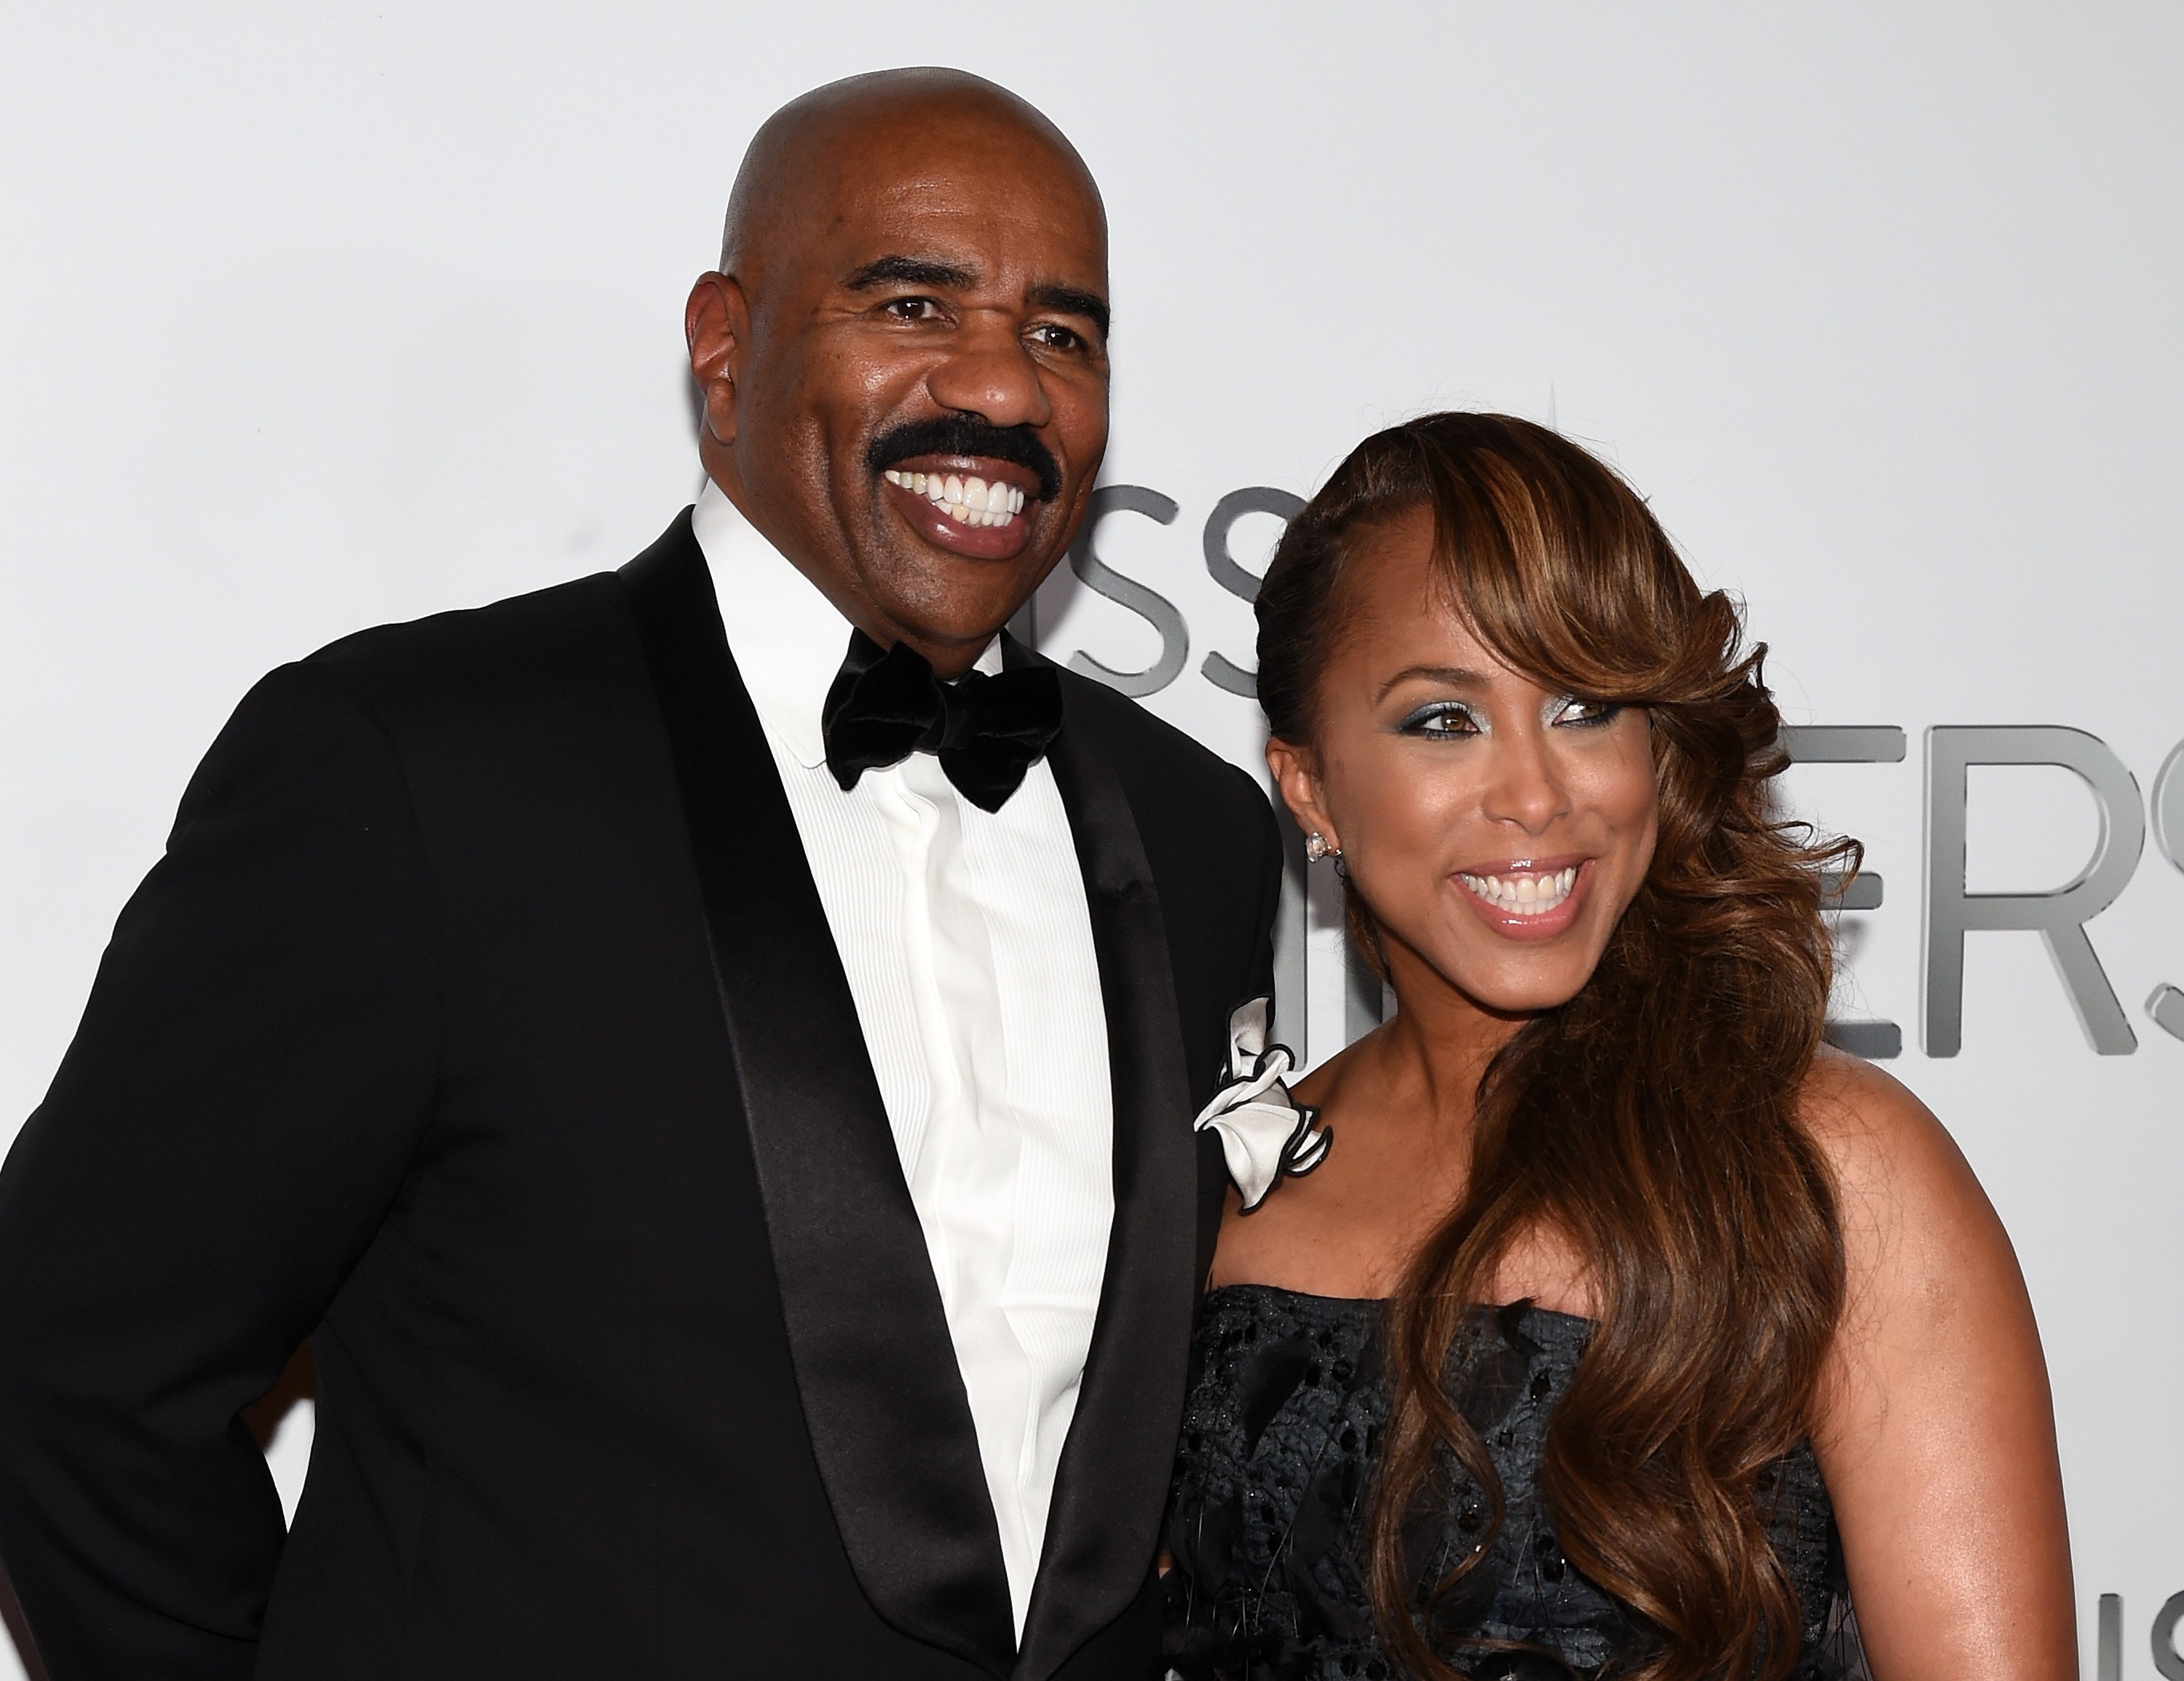 Steve and Marjorie Harvey at the 2015 Miss Universe pageant. | Photo: Getty Images